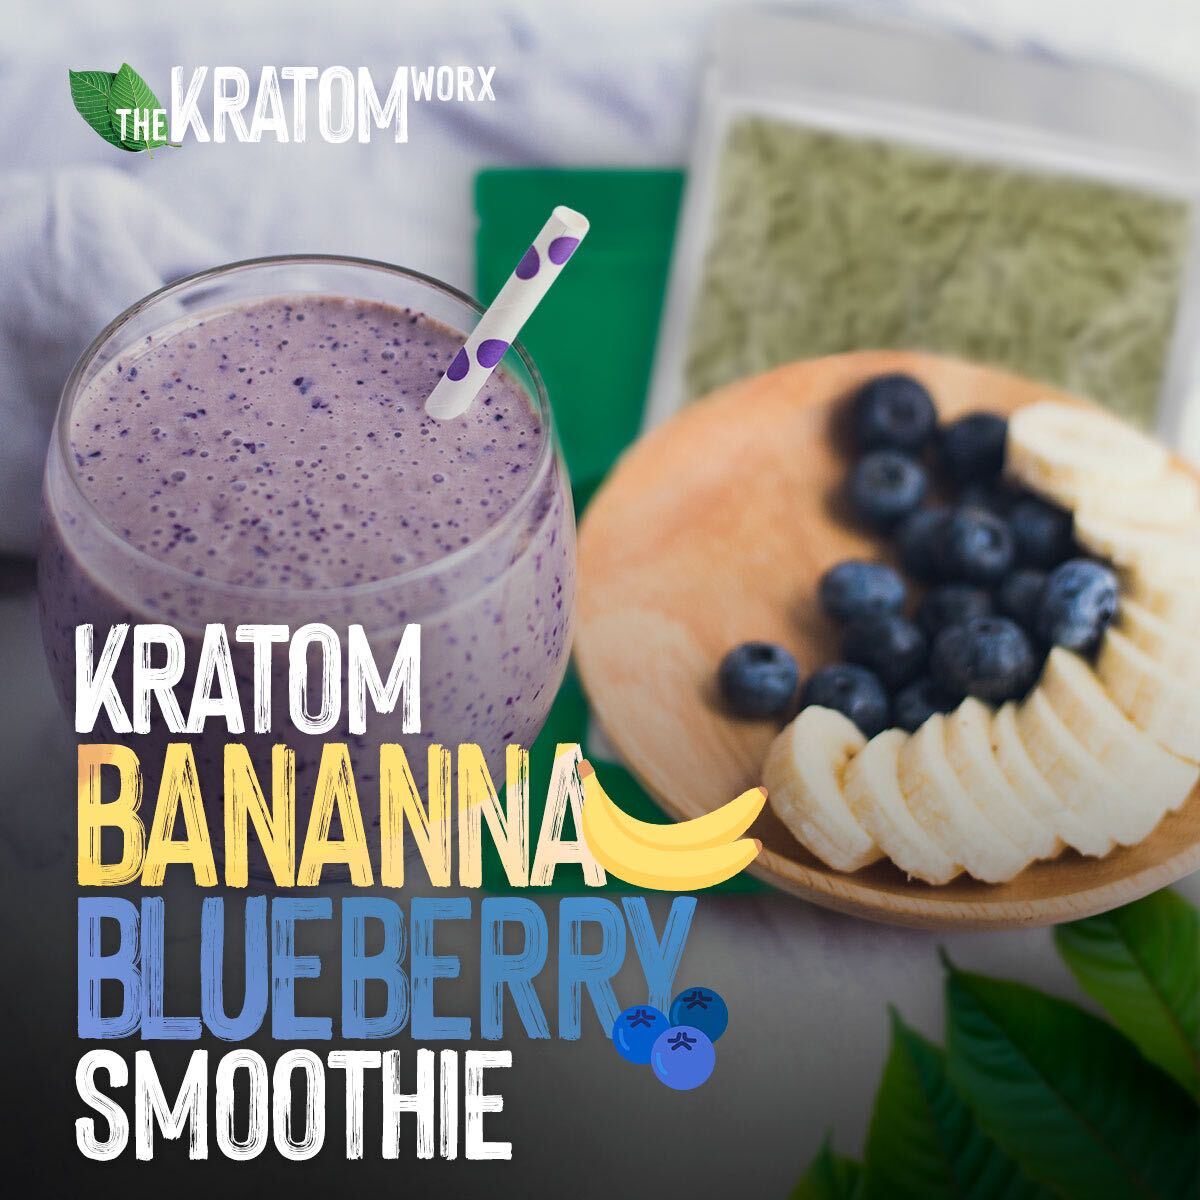 Kratom Blueberry Banana Smoothie - Get Your Daily Dose of Kratom